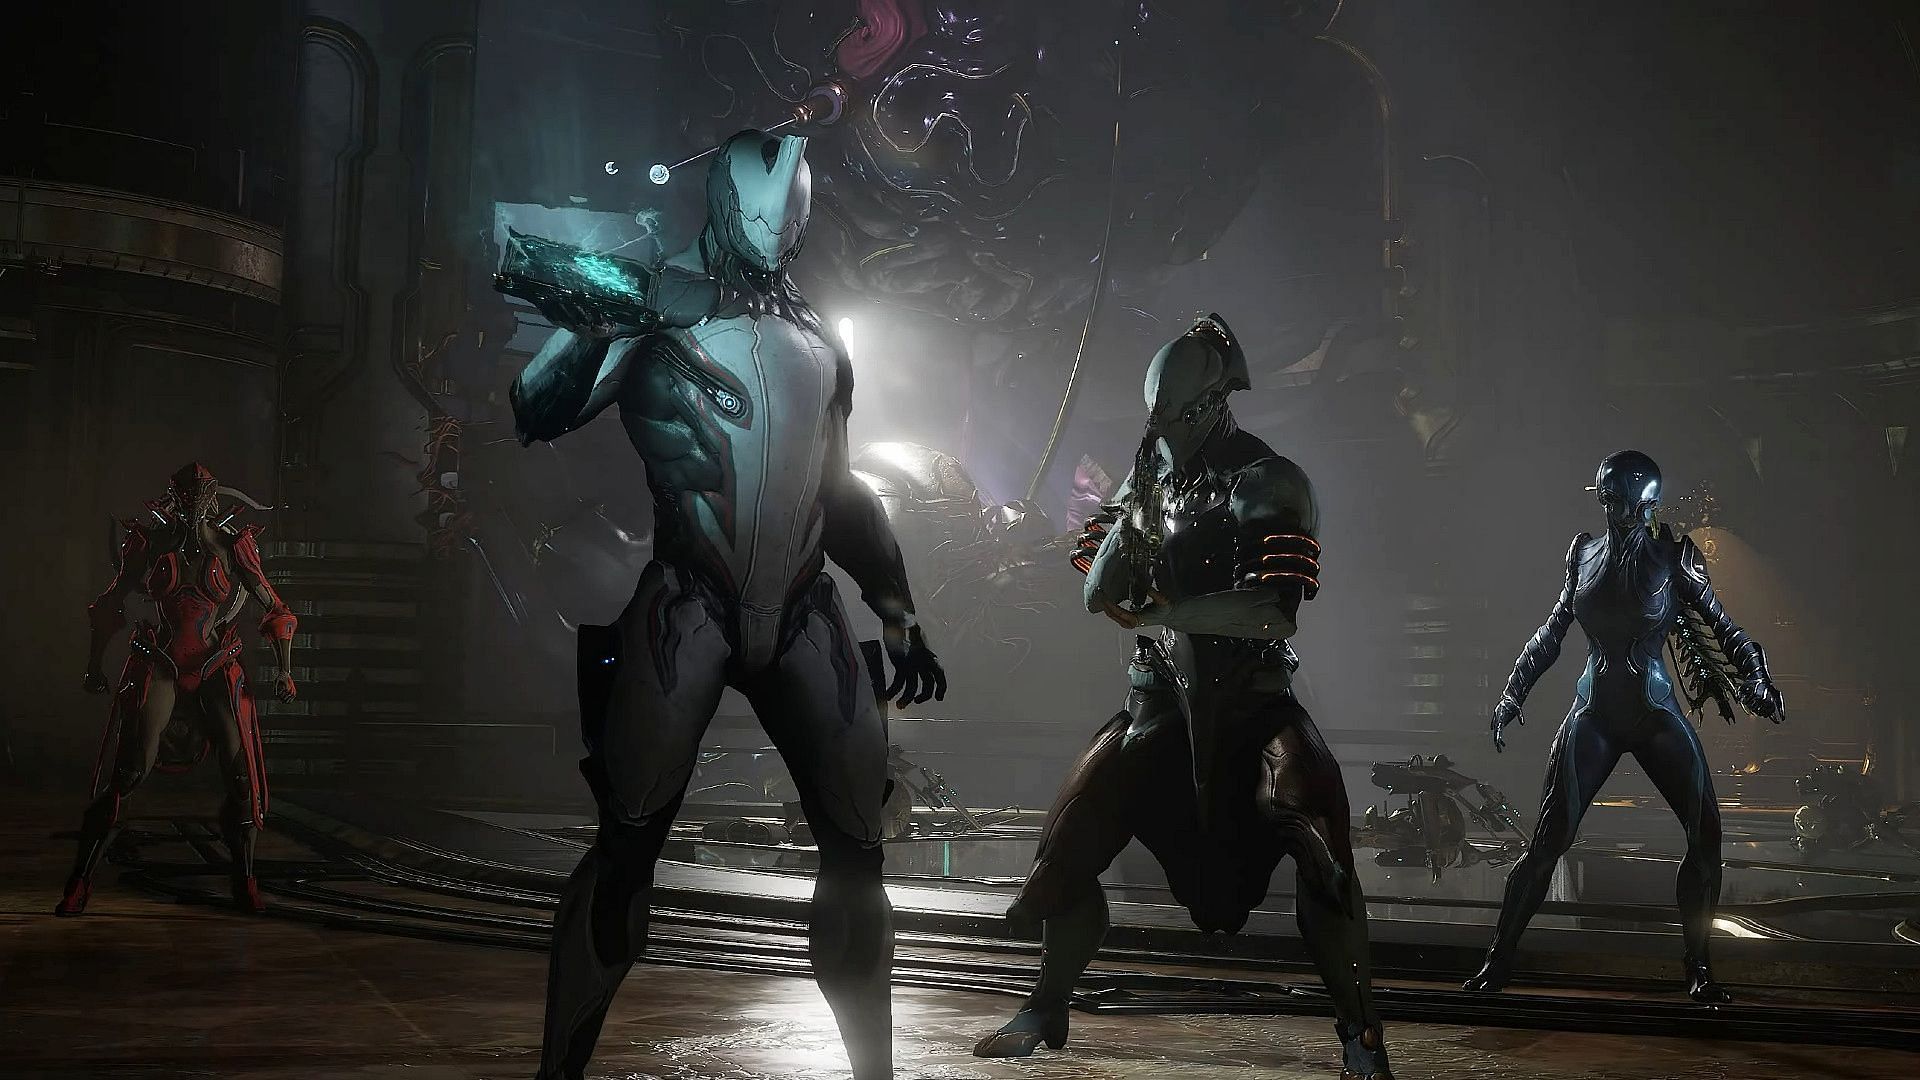 Four Warframes in the Entrati Lab, Excalibur holding a Grimoire, key art for Whispers update